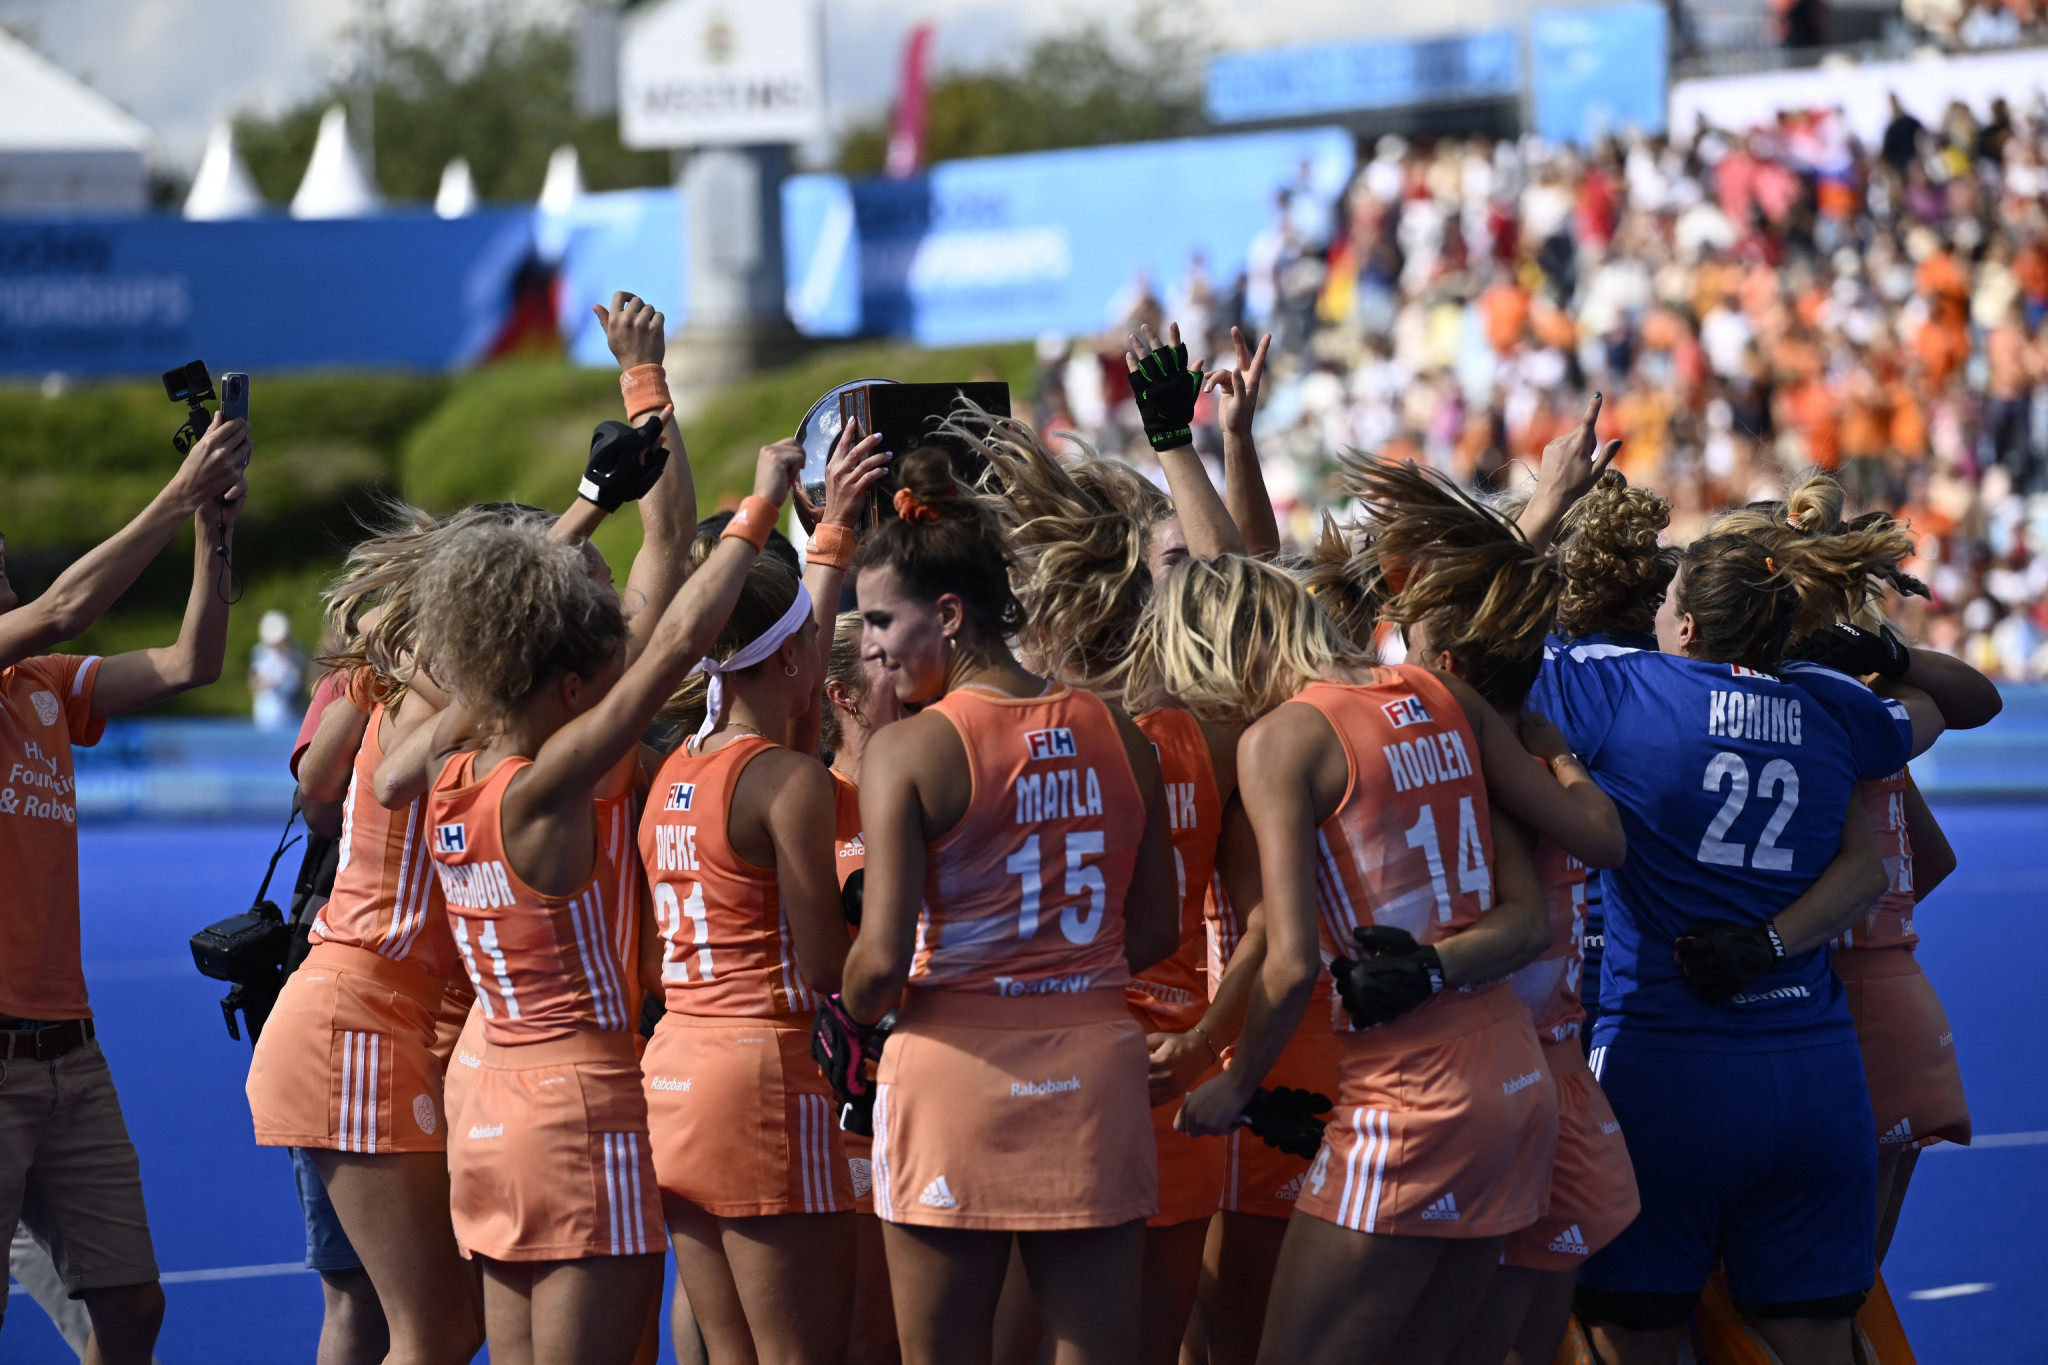 The Netherlands women's team celebrate after winning the European Championship for a 12th time ©Getty Images